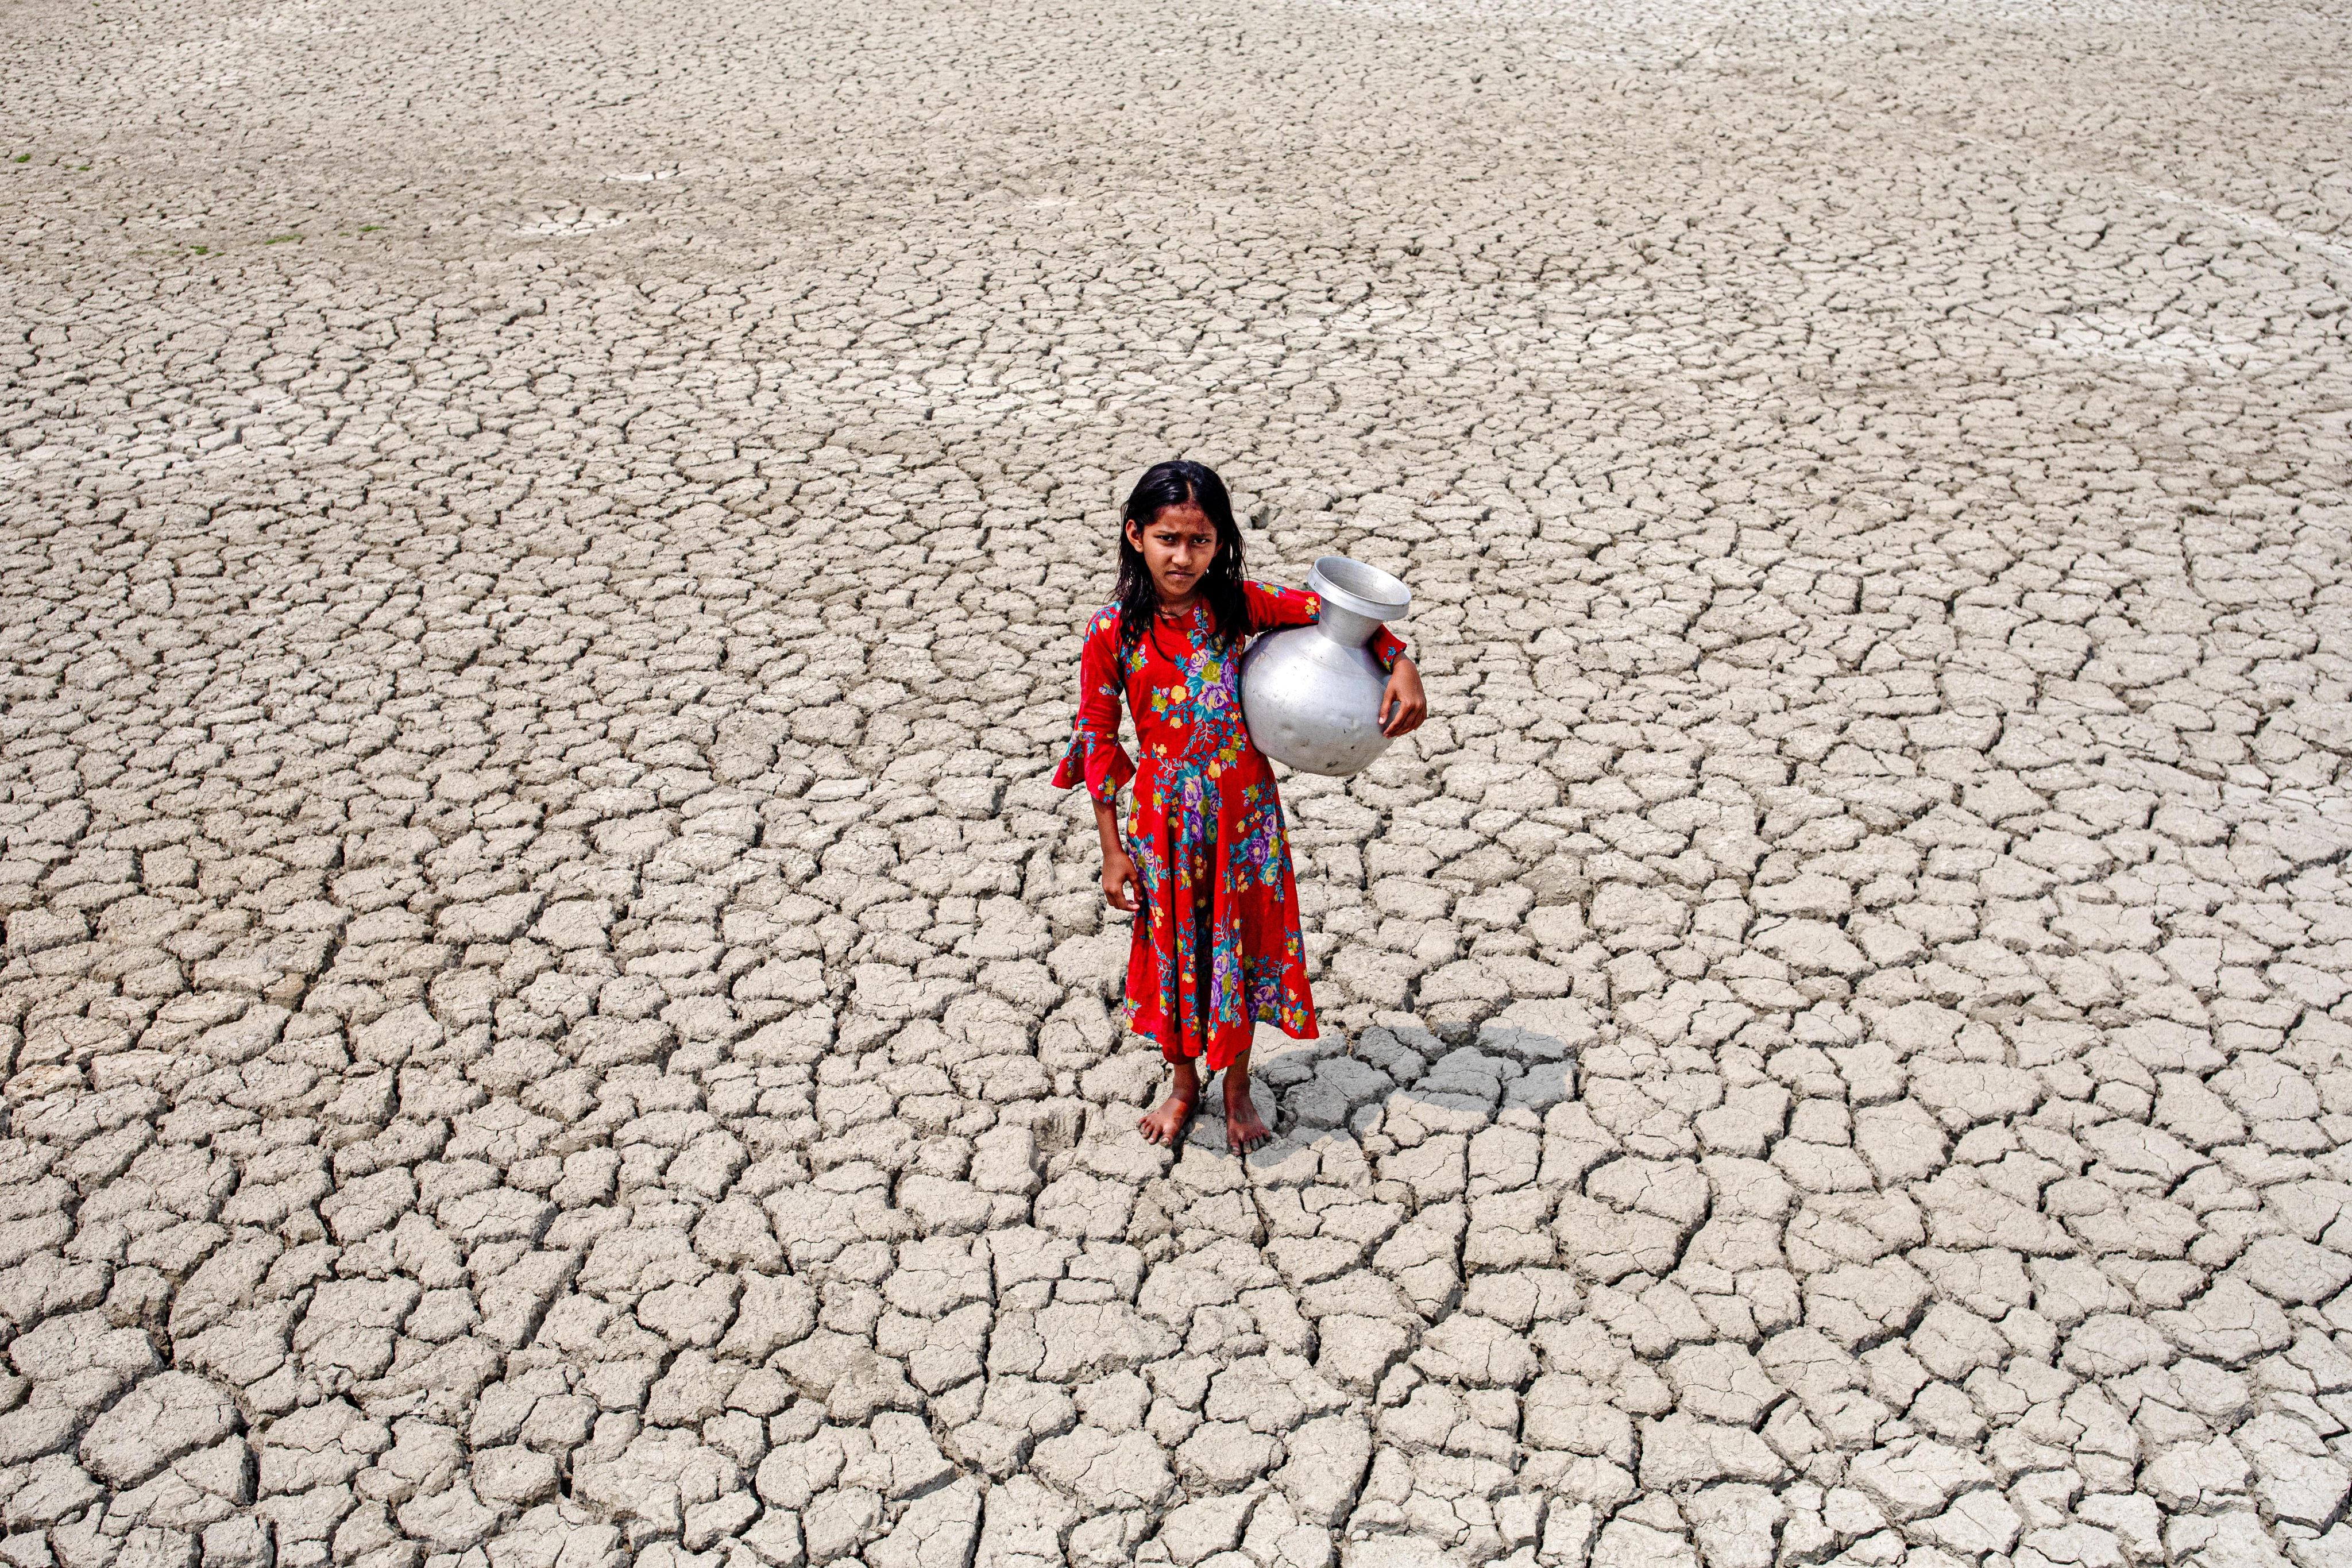 A gril walks into a deep cracks field after collecting drinking water from a pond near mangrove forest Sundarban in Satkhira, Bangladesh on March 27, 2022.  (Photo by Kazi Salahuddin Razu/NurPhoto via Getty Images)&#xA;&#xA;CREDIT: Getty Images